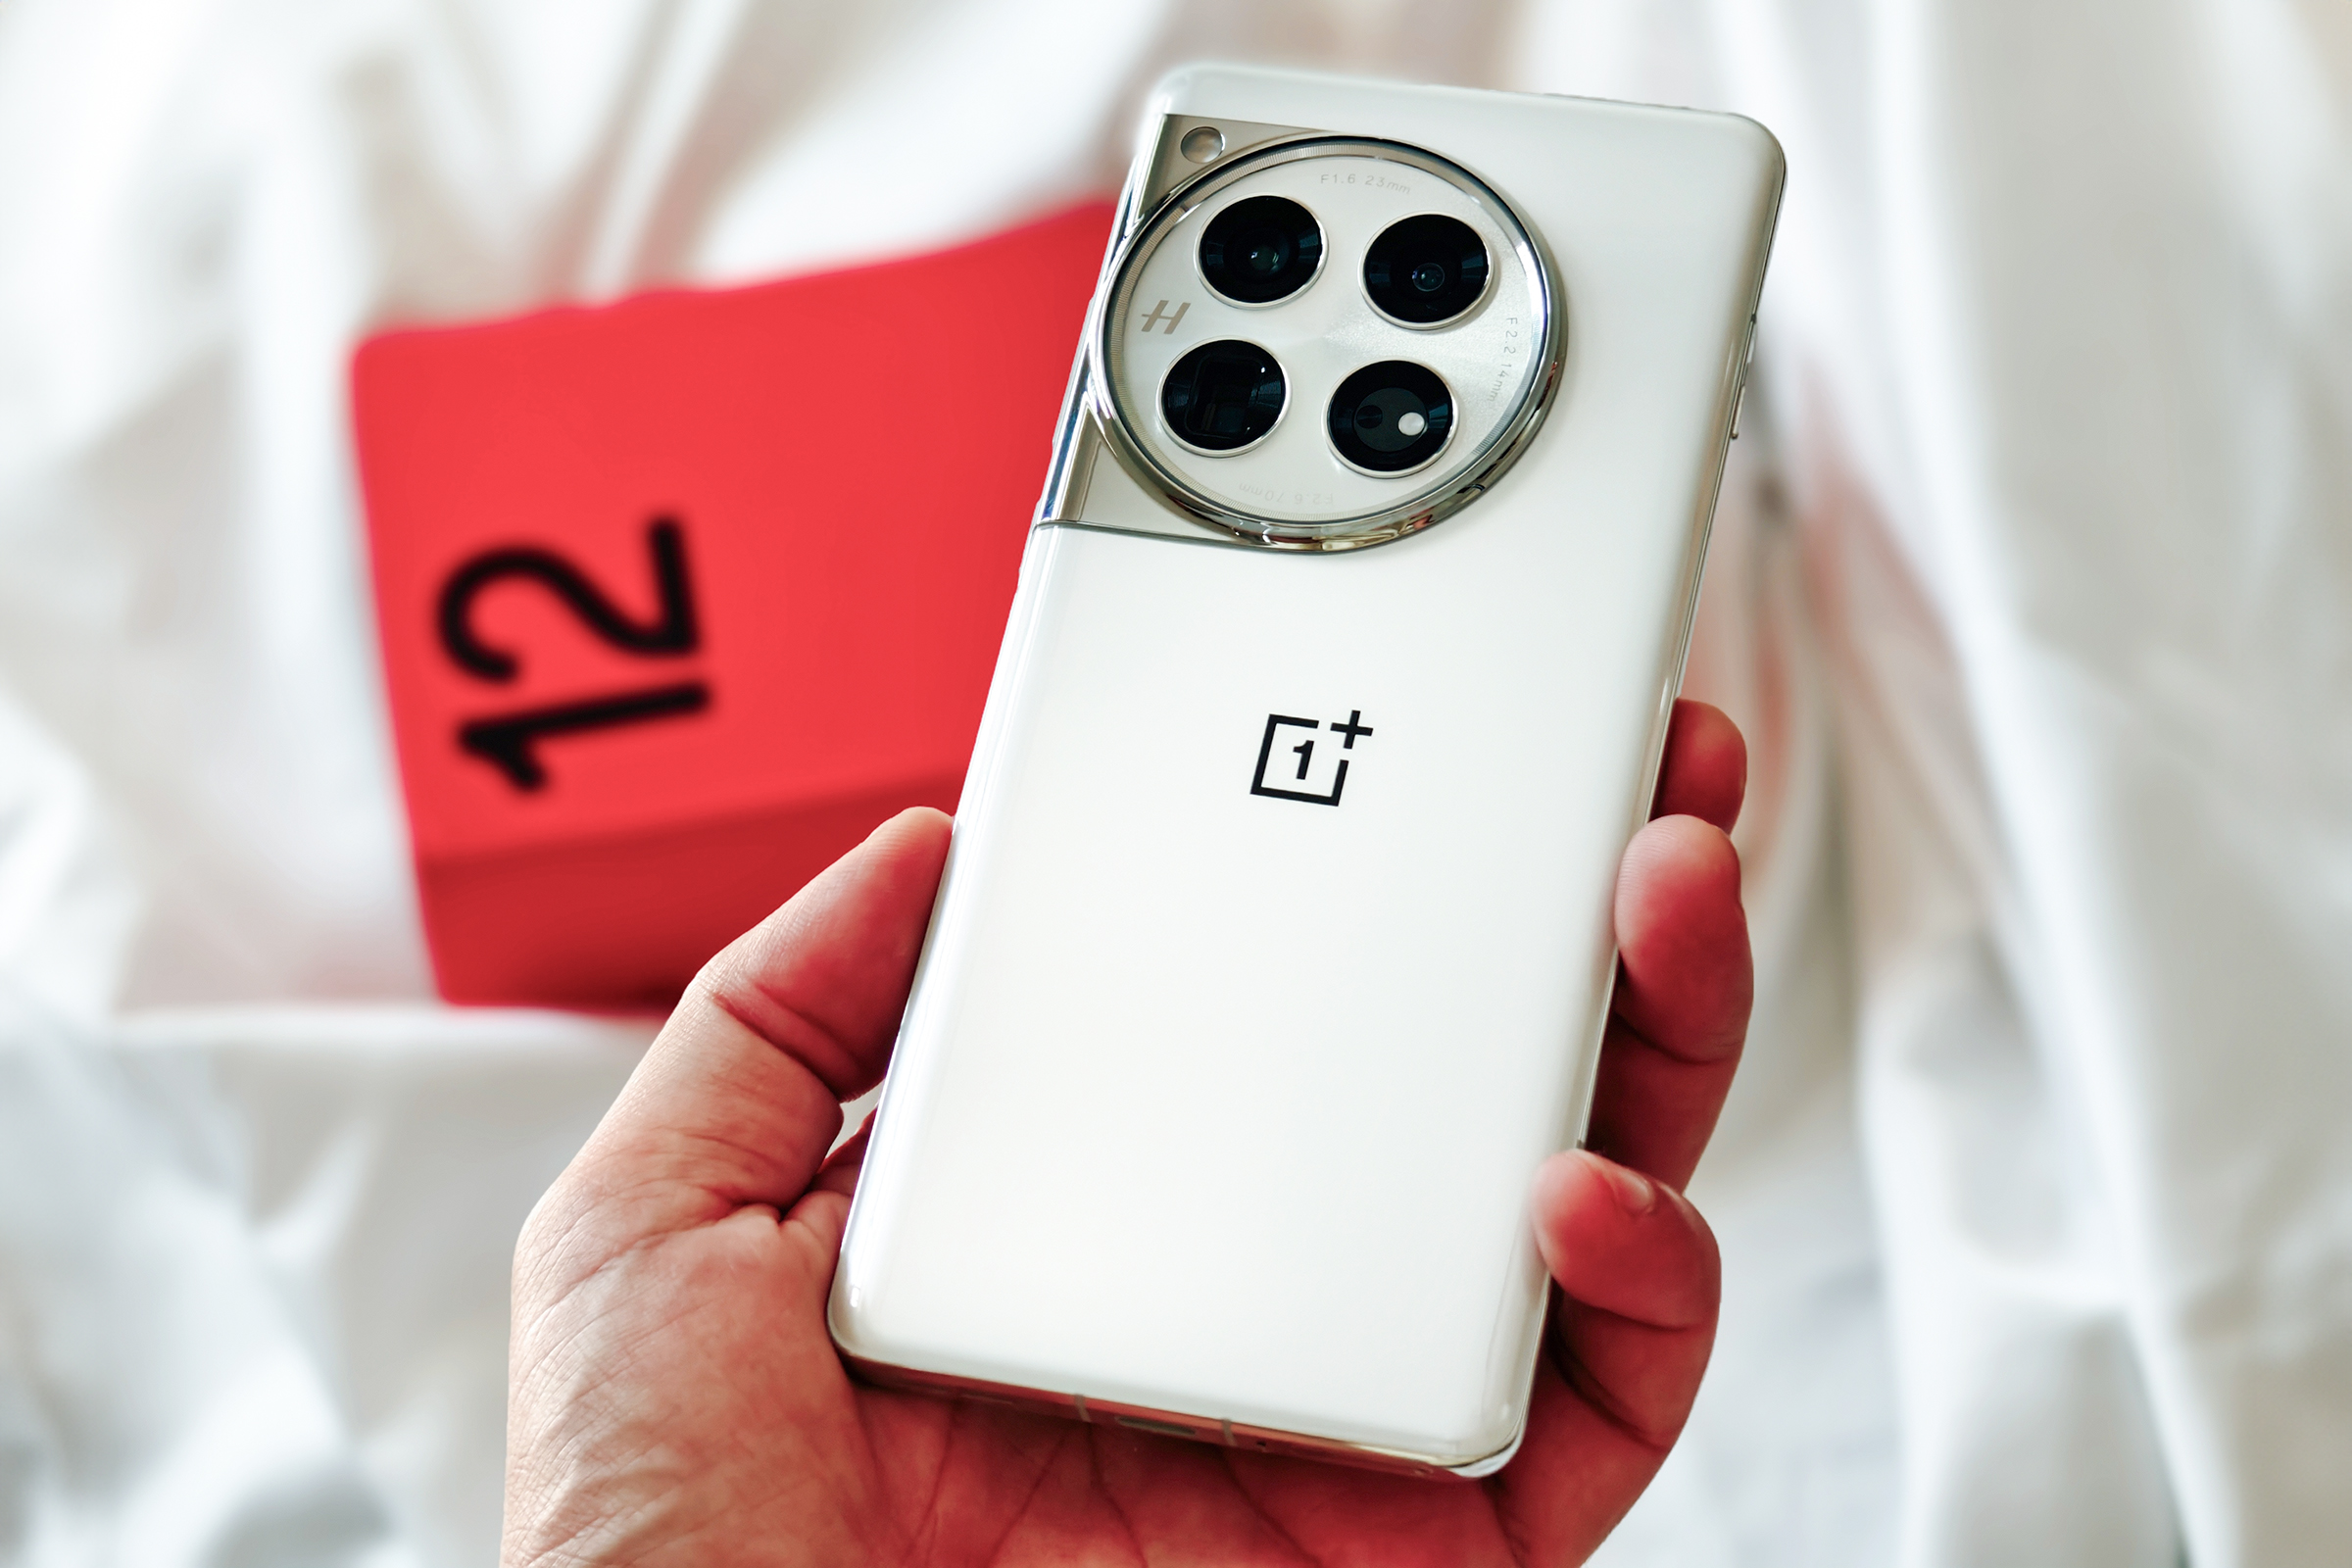 OnePlus 12 Glacial White color held in hand against its red box.